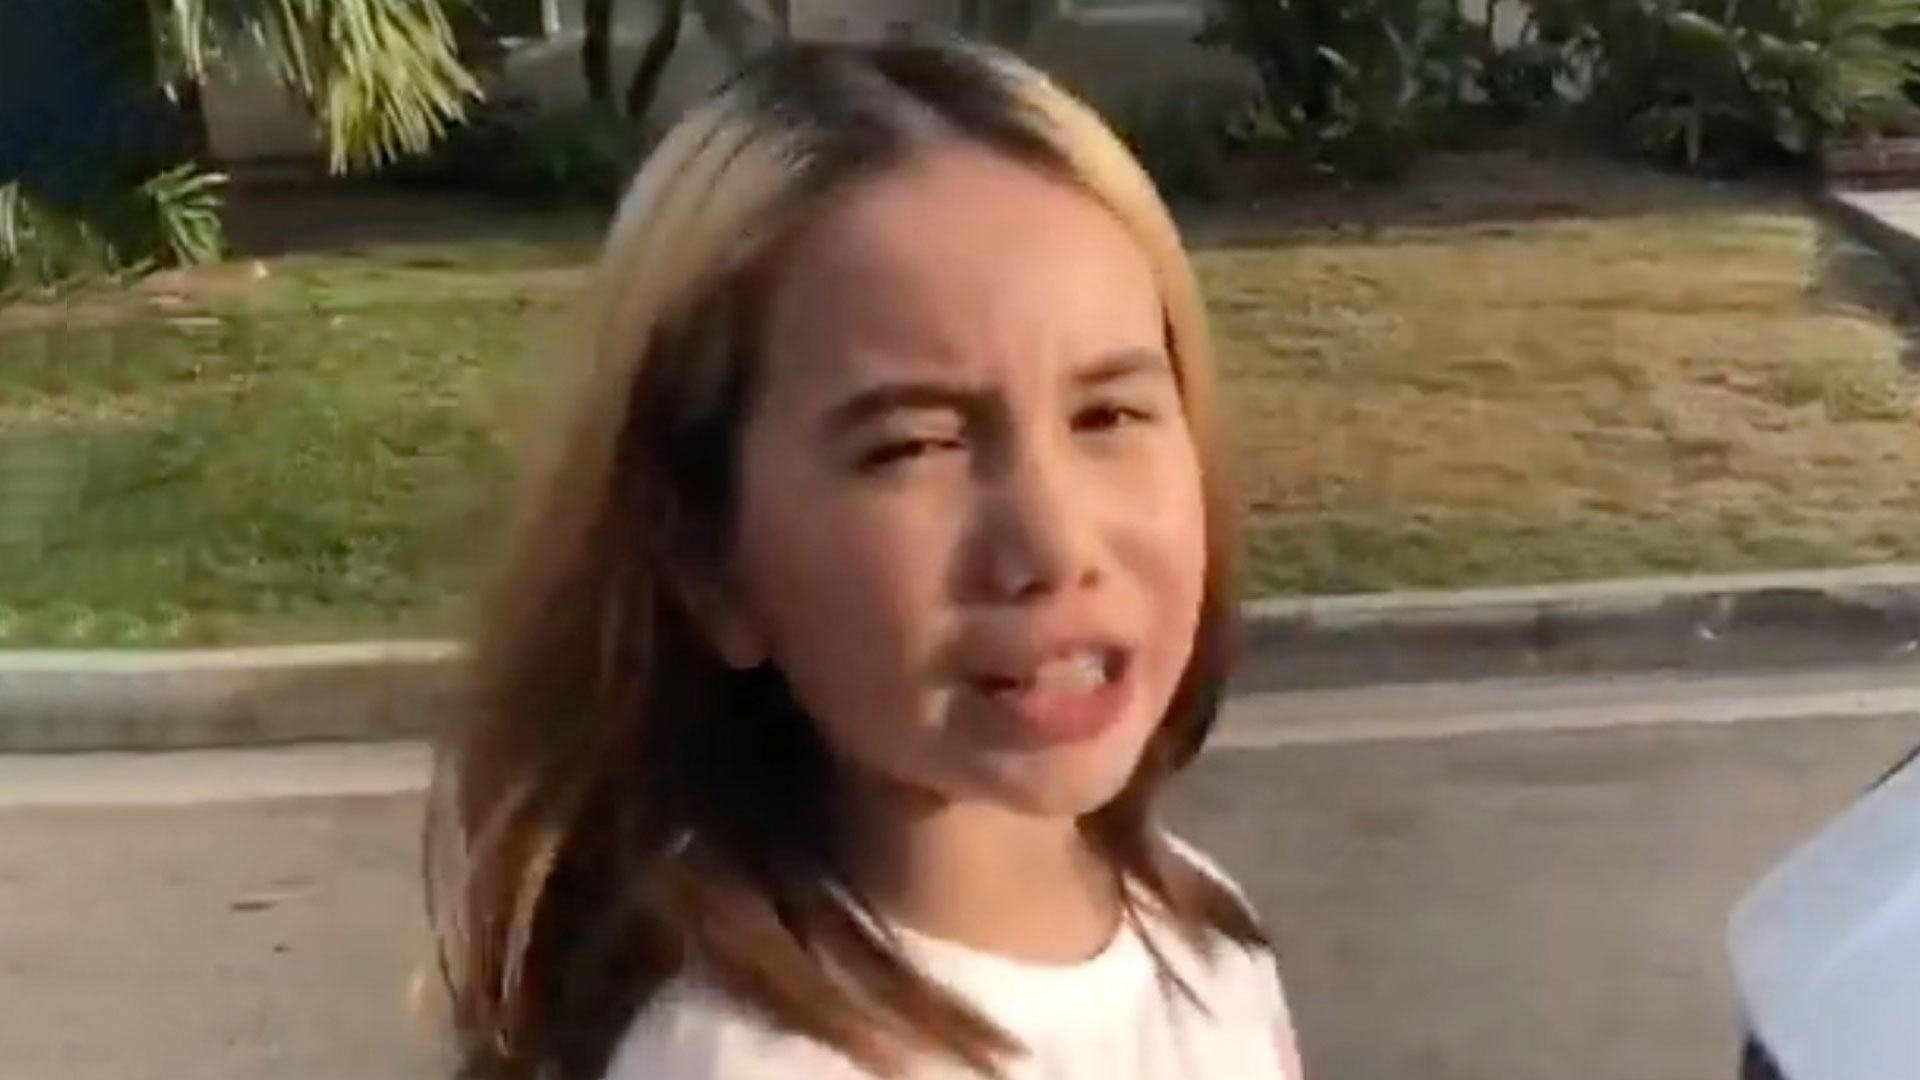 Lil Tay dead: Teen rap star Claire Hope, 14, and brother's death mourned by family, says post on her Instagram account